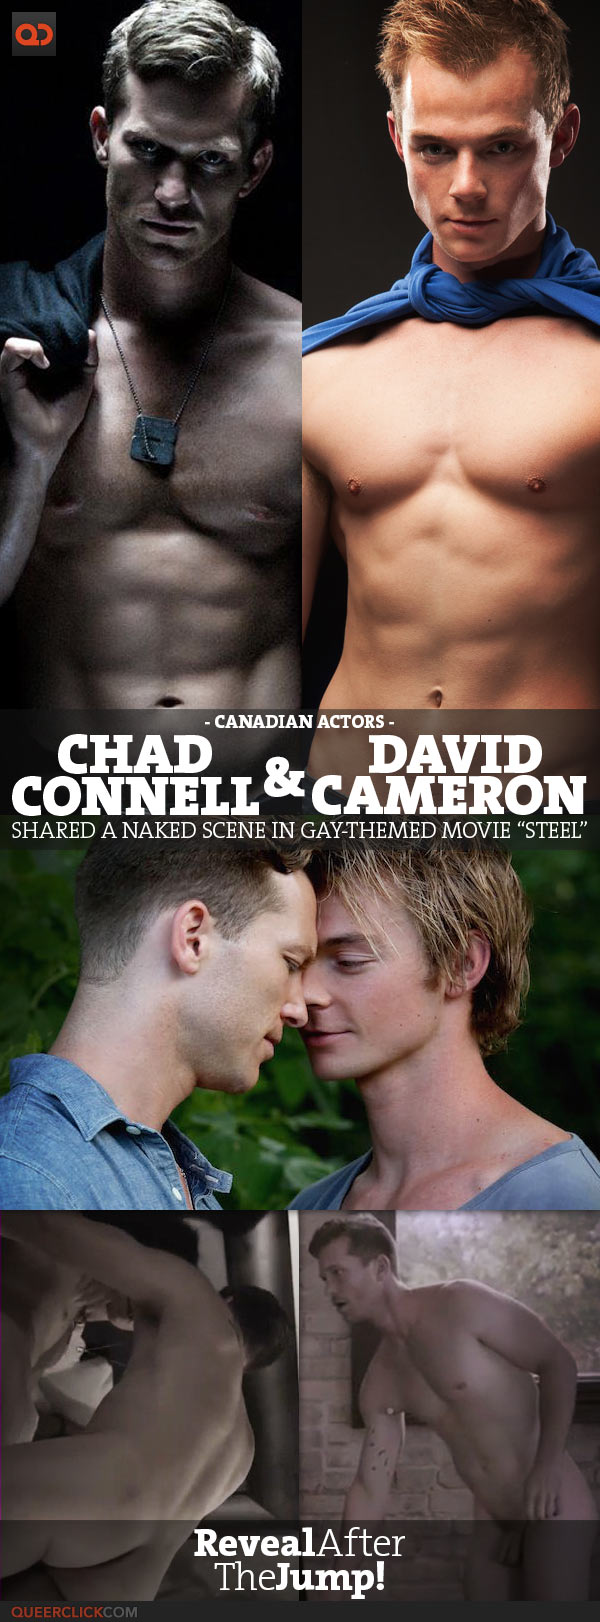 Canadian Actors Chad Connell And David Cameron Shared A Naked Scene In Gay-Themed Movie “Steel”!